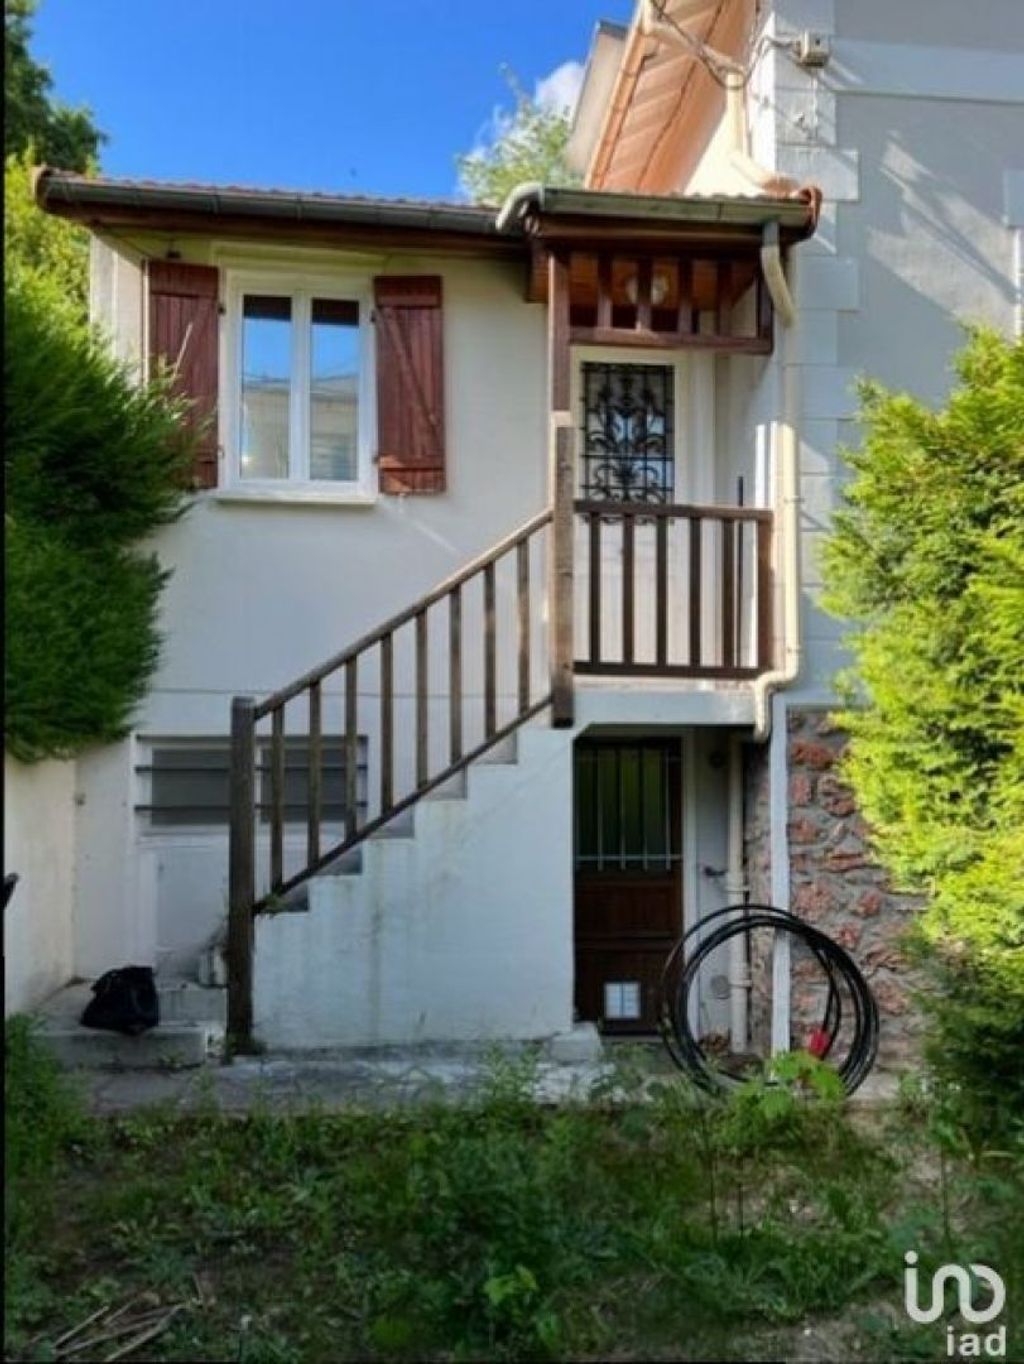 Achat appartement 2 pièces 44 m² - Viroflay